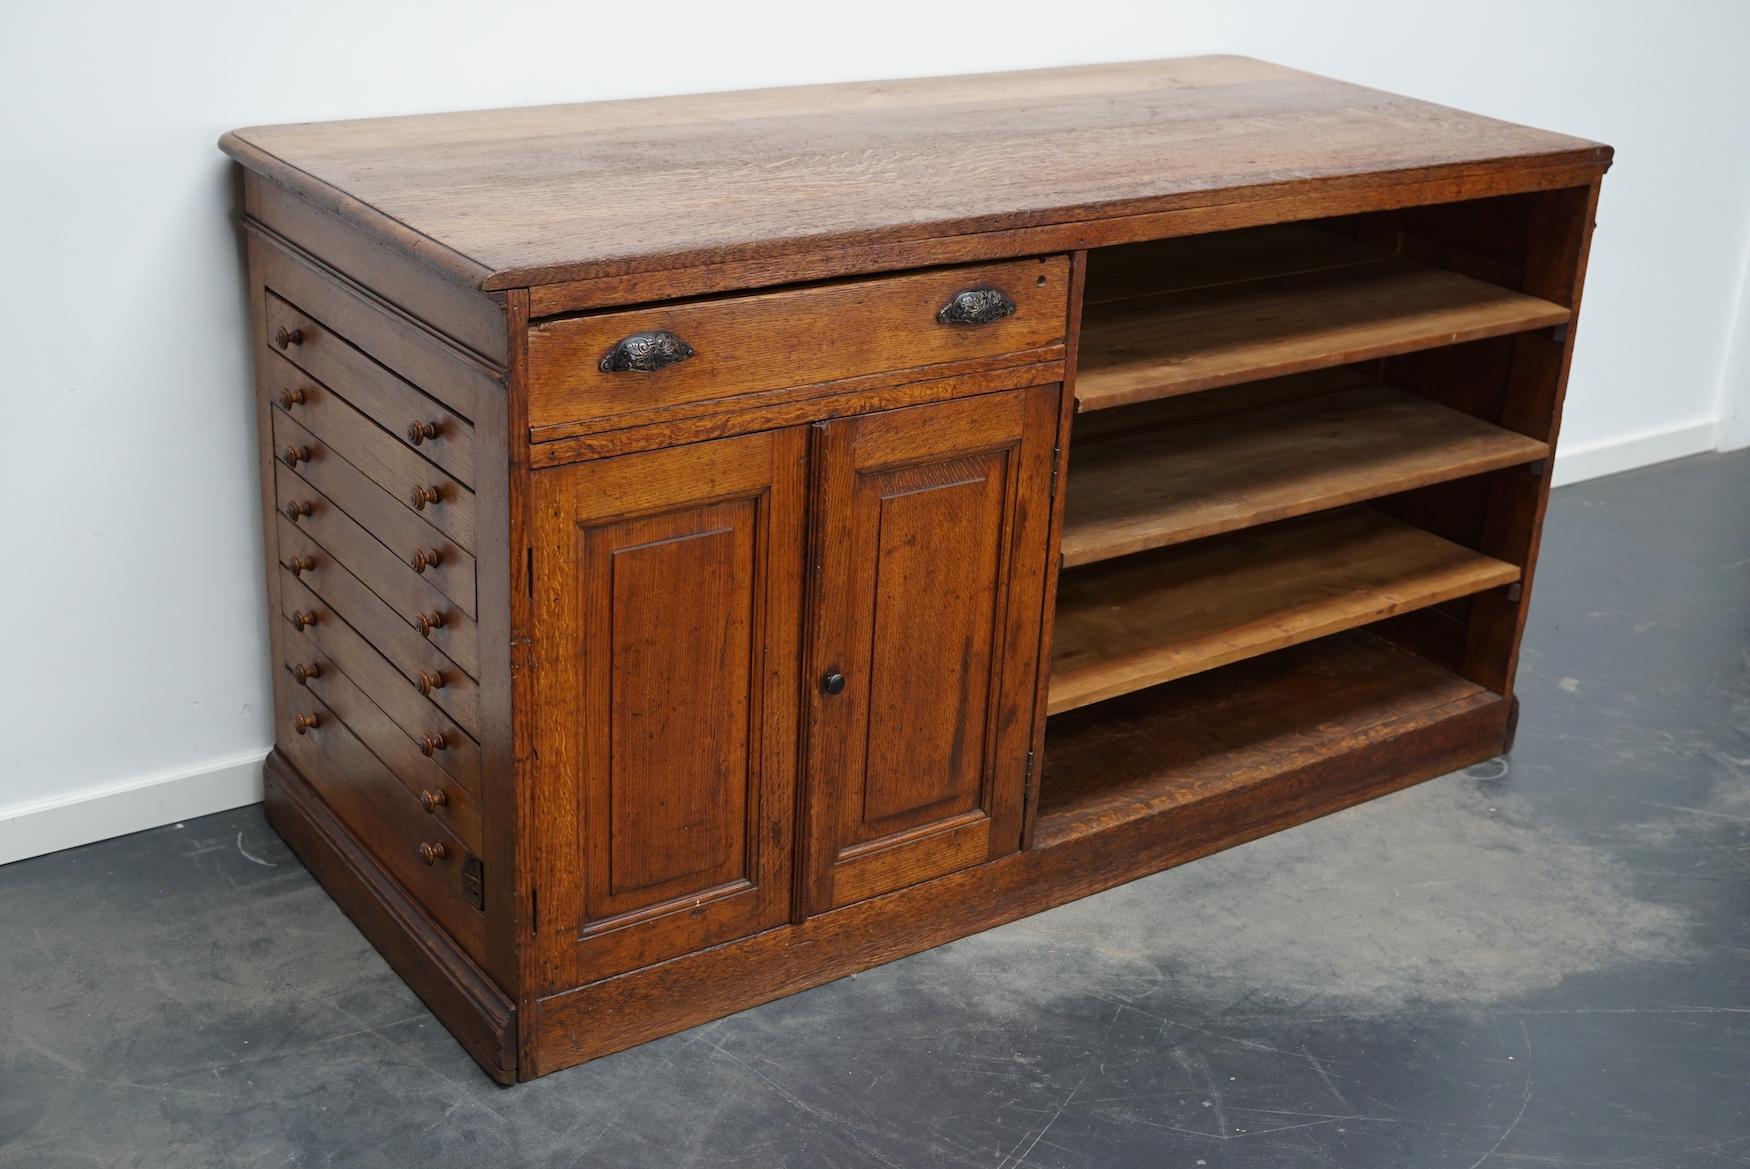 This antique oak shop counter dates from the turn of the century and was made in France. It features an oak paneled frame, shelves, drawers and two doors. Very unique item.